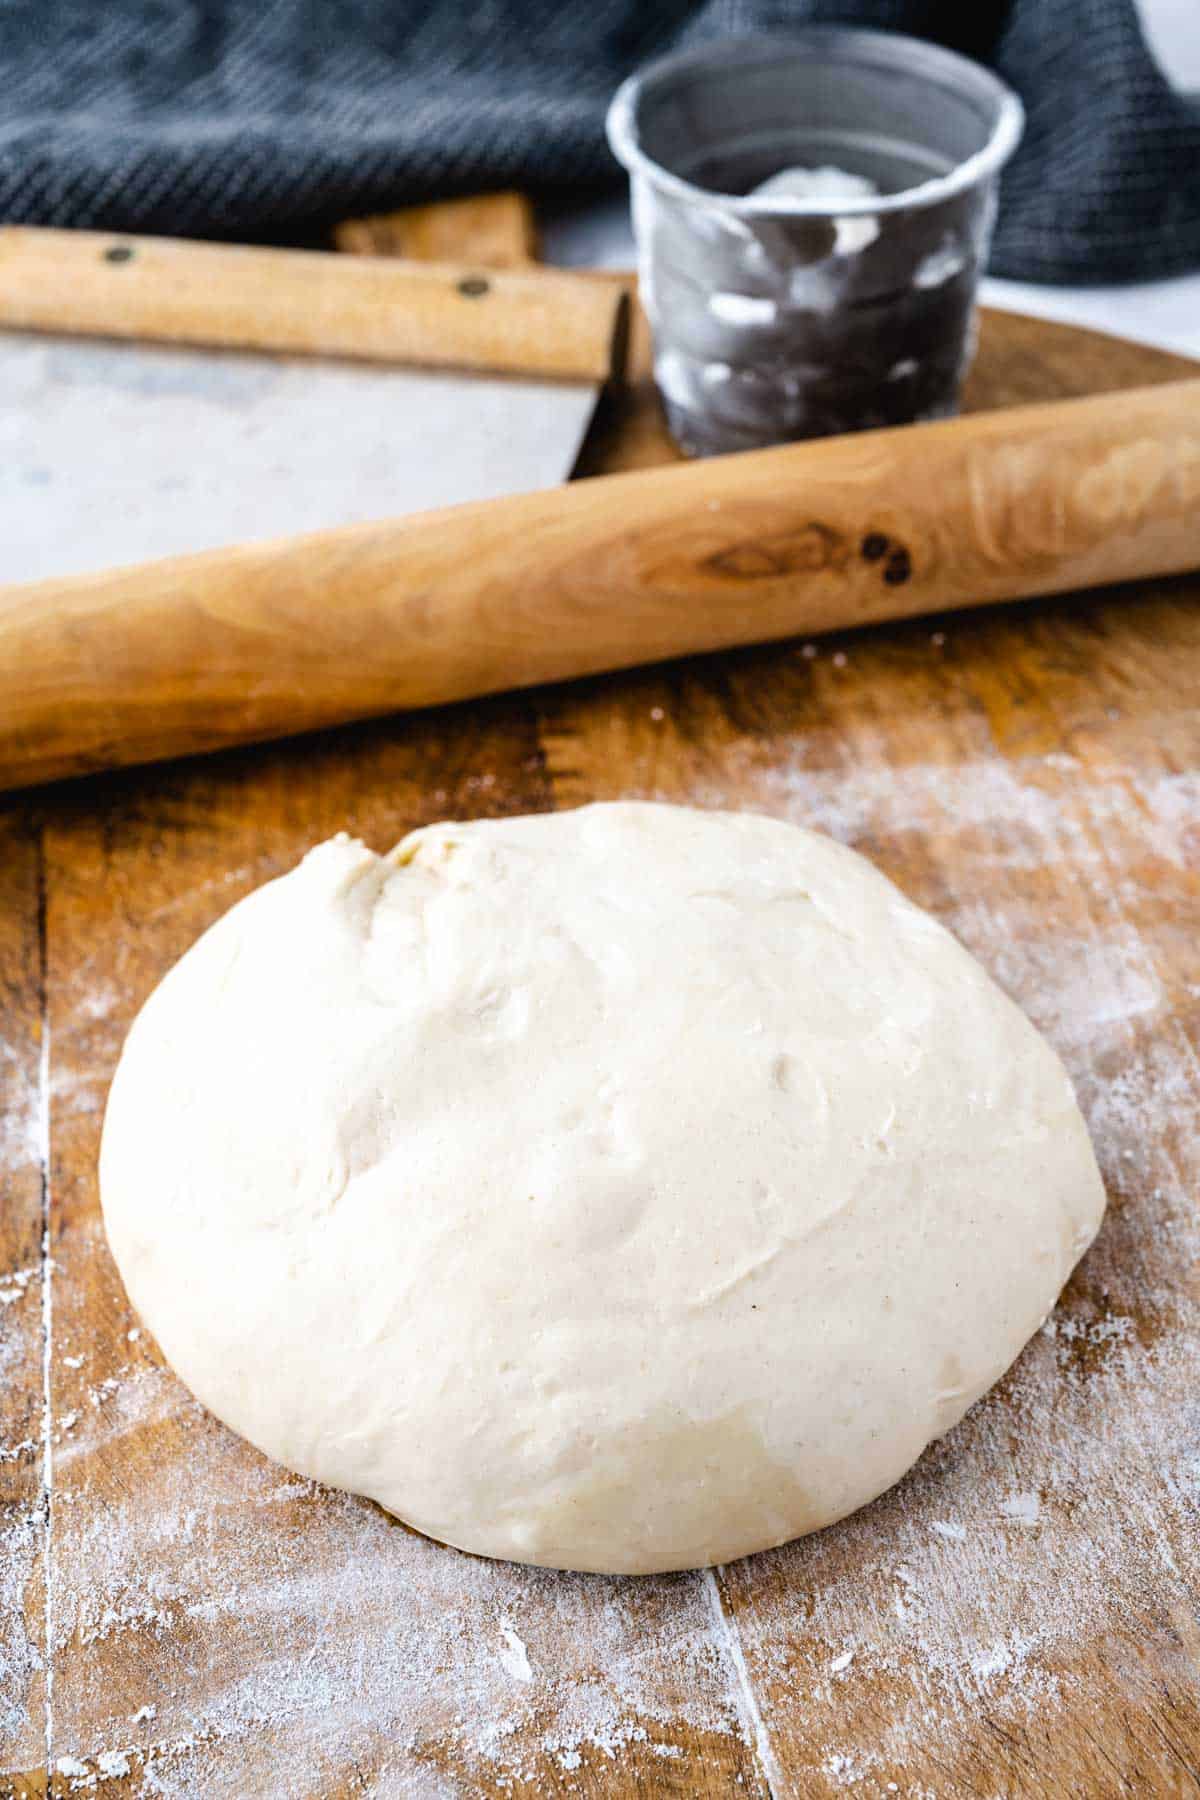 A close-up shot of a floured wooden board with 10-minute pizza dough ball ready to use.